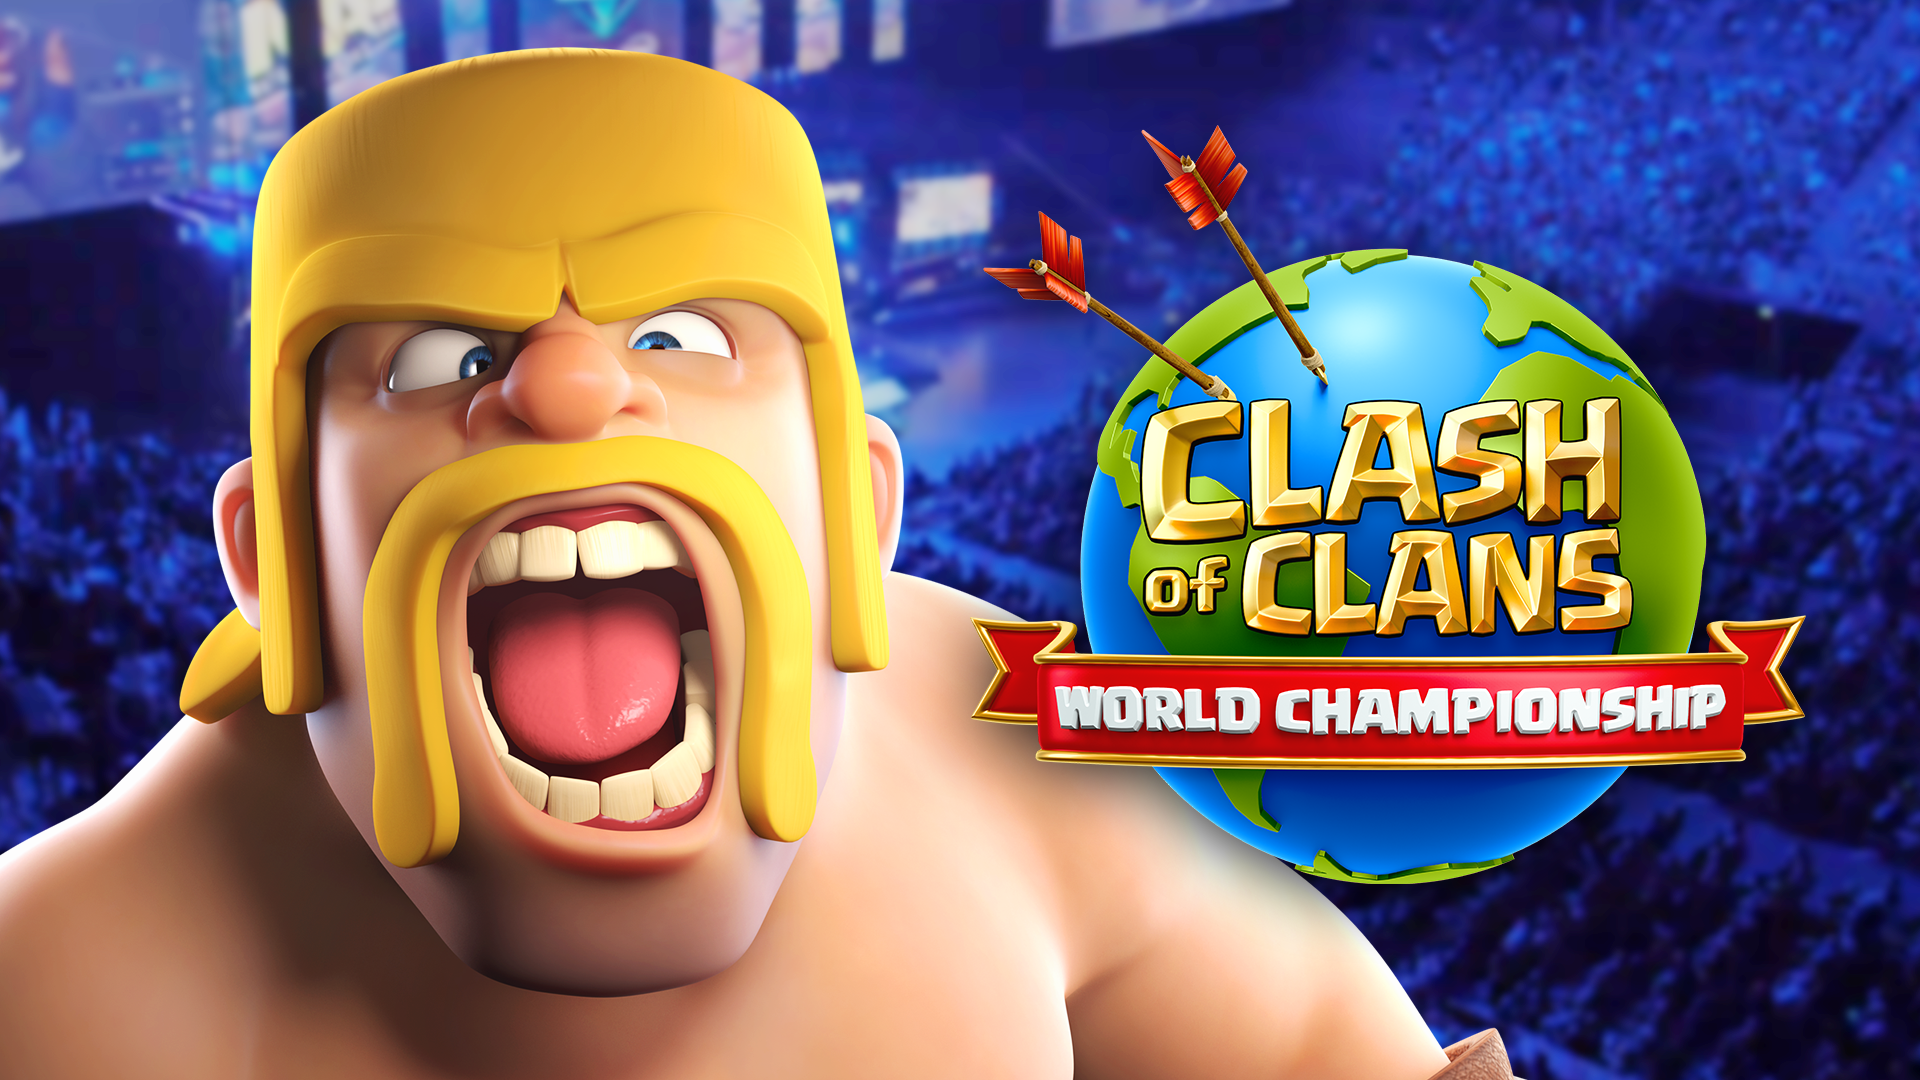 Clash of Clans comes up Pool Prize of Million dollar for its User